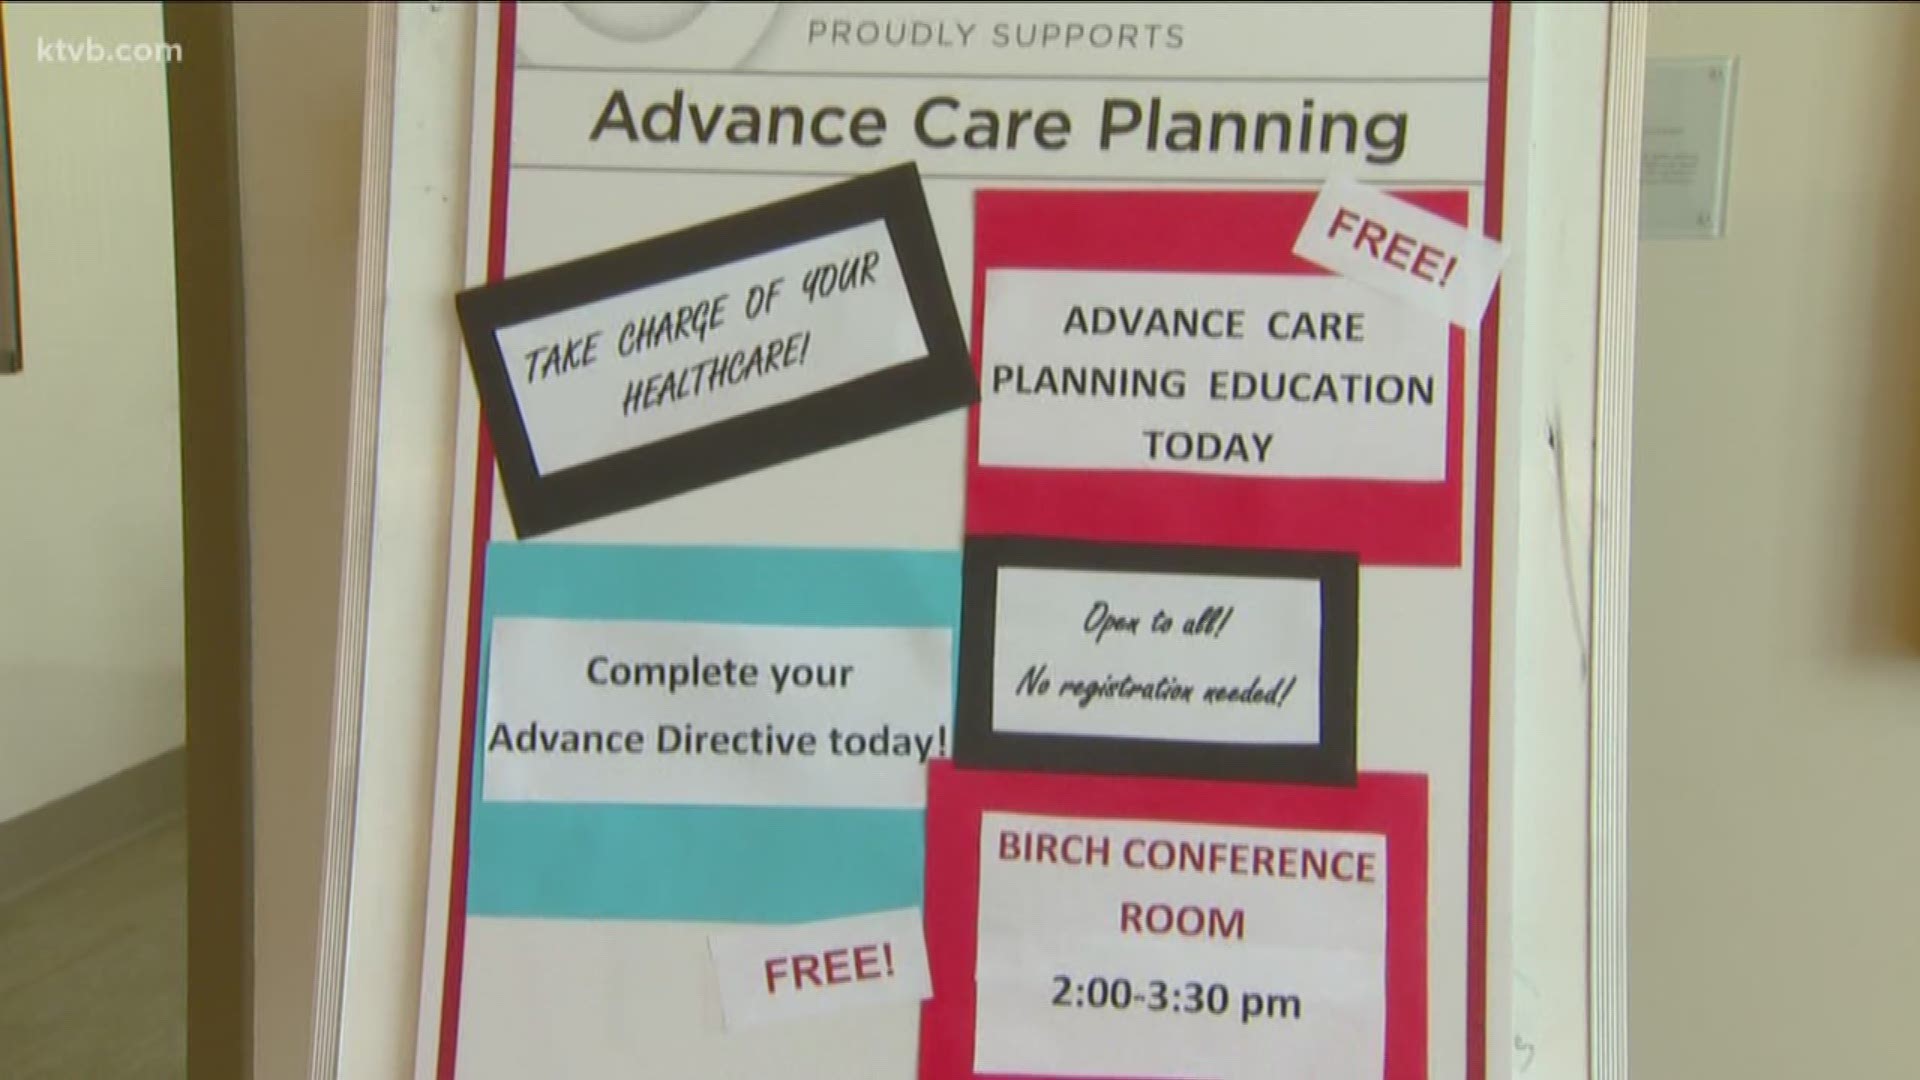 Advance care planning is all about making decisions about future health care while you can still choose for yourself.